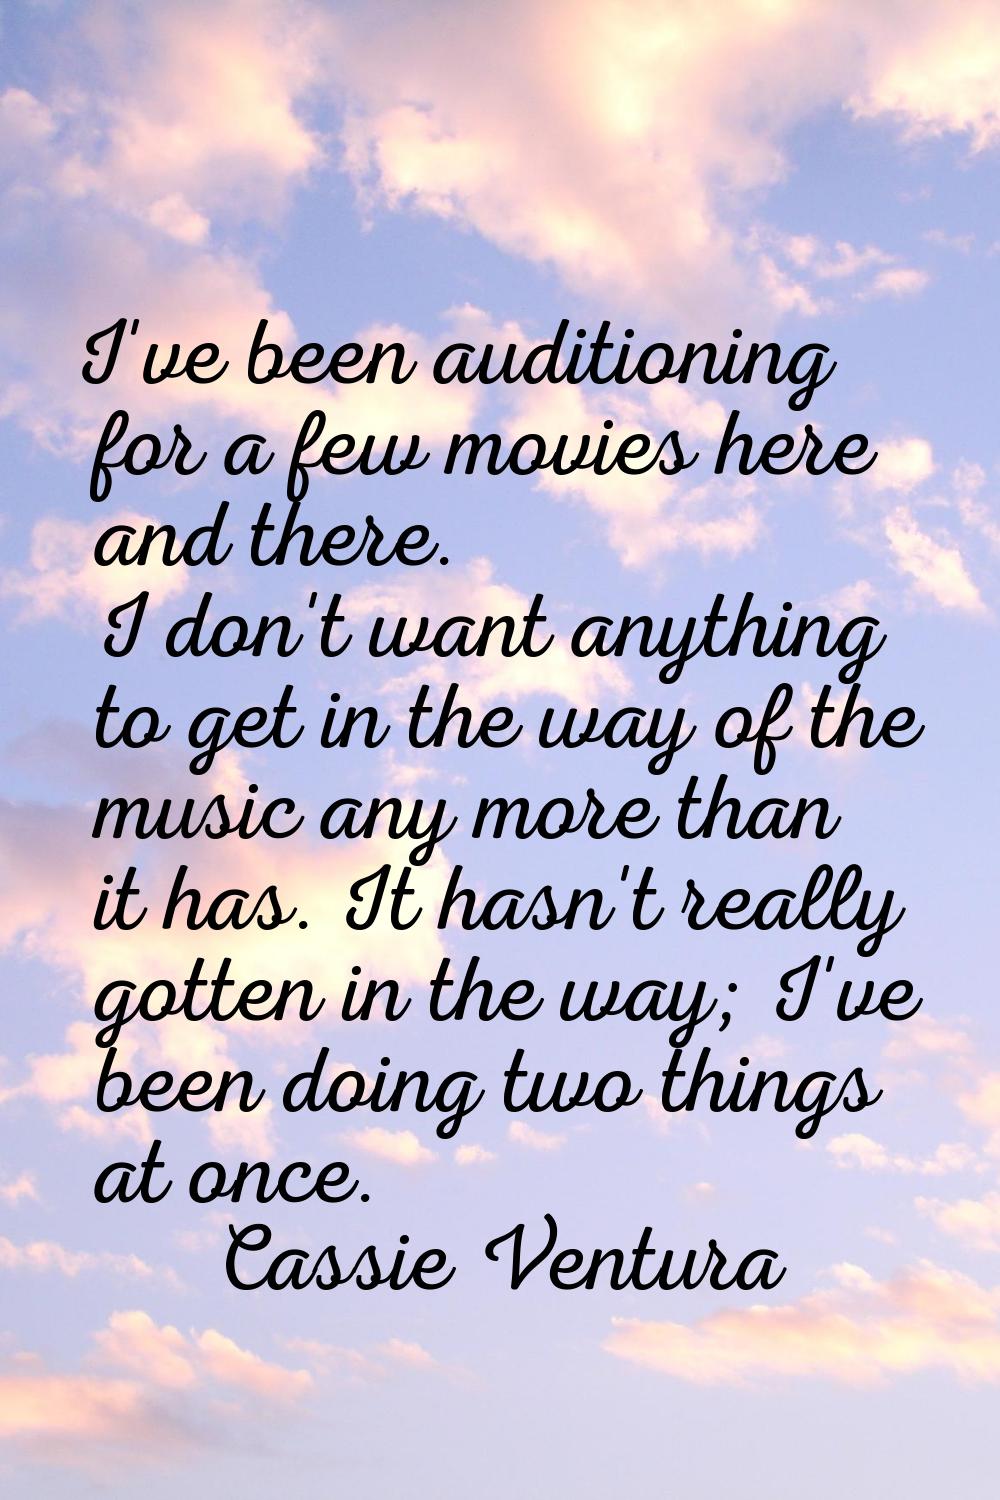 I've been auditioning for a few movies here and there. I don't want anything to get in the way of t